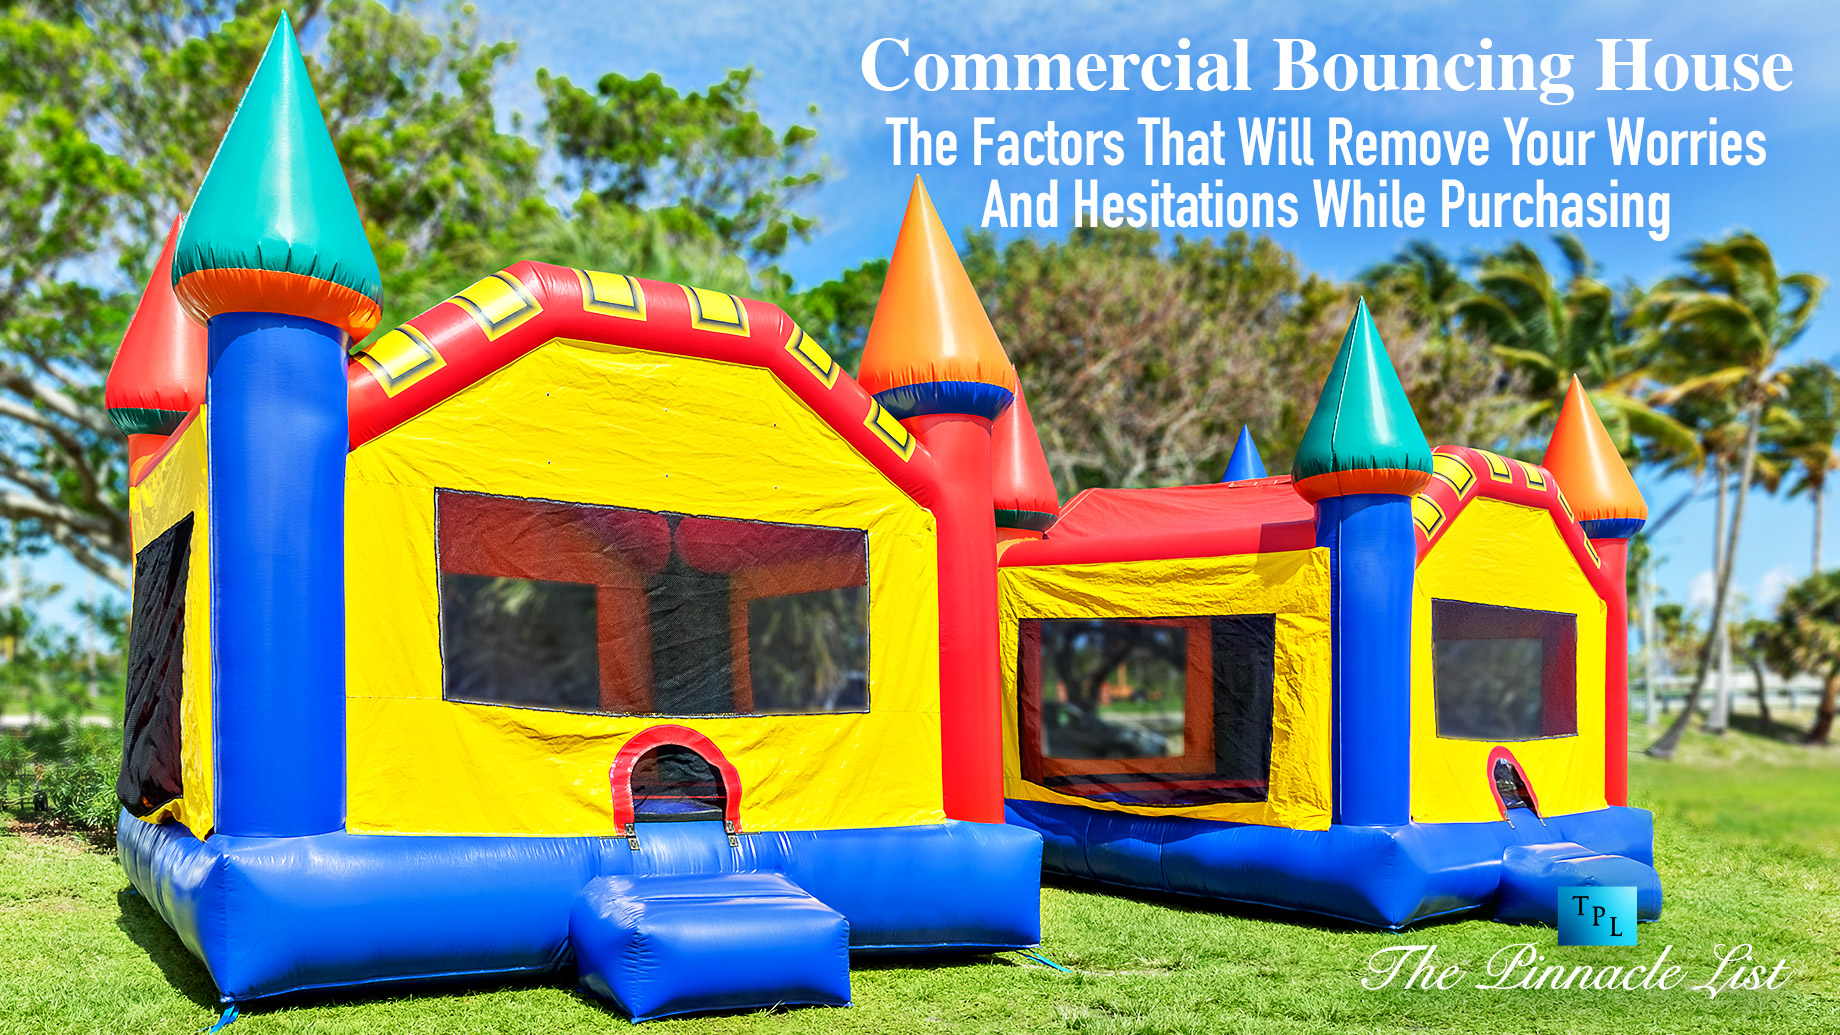 Commercial Bouncing House: The Factors That Will Remove Your Worries And Hesitations While Purchasing